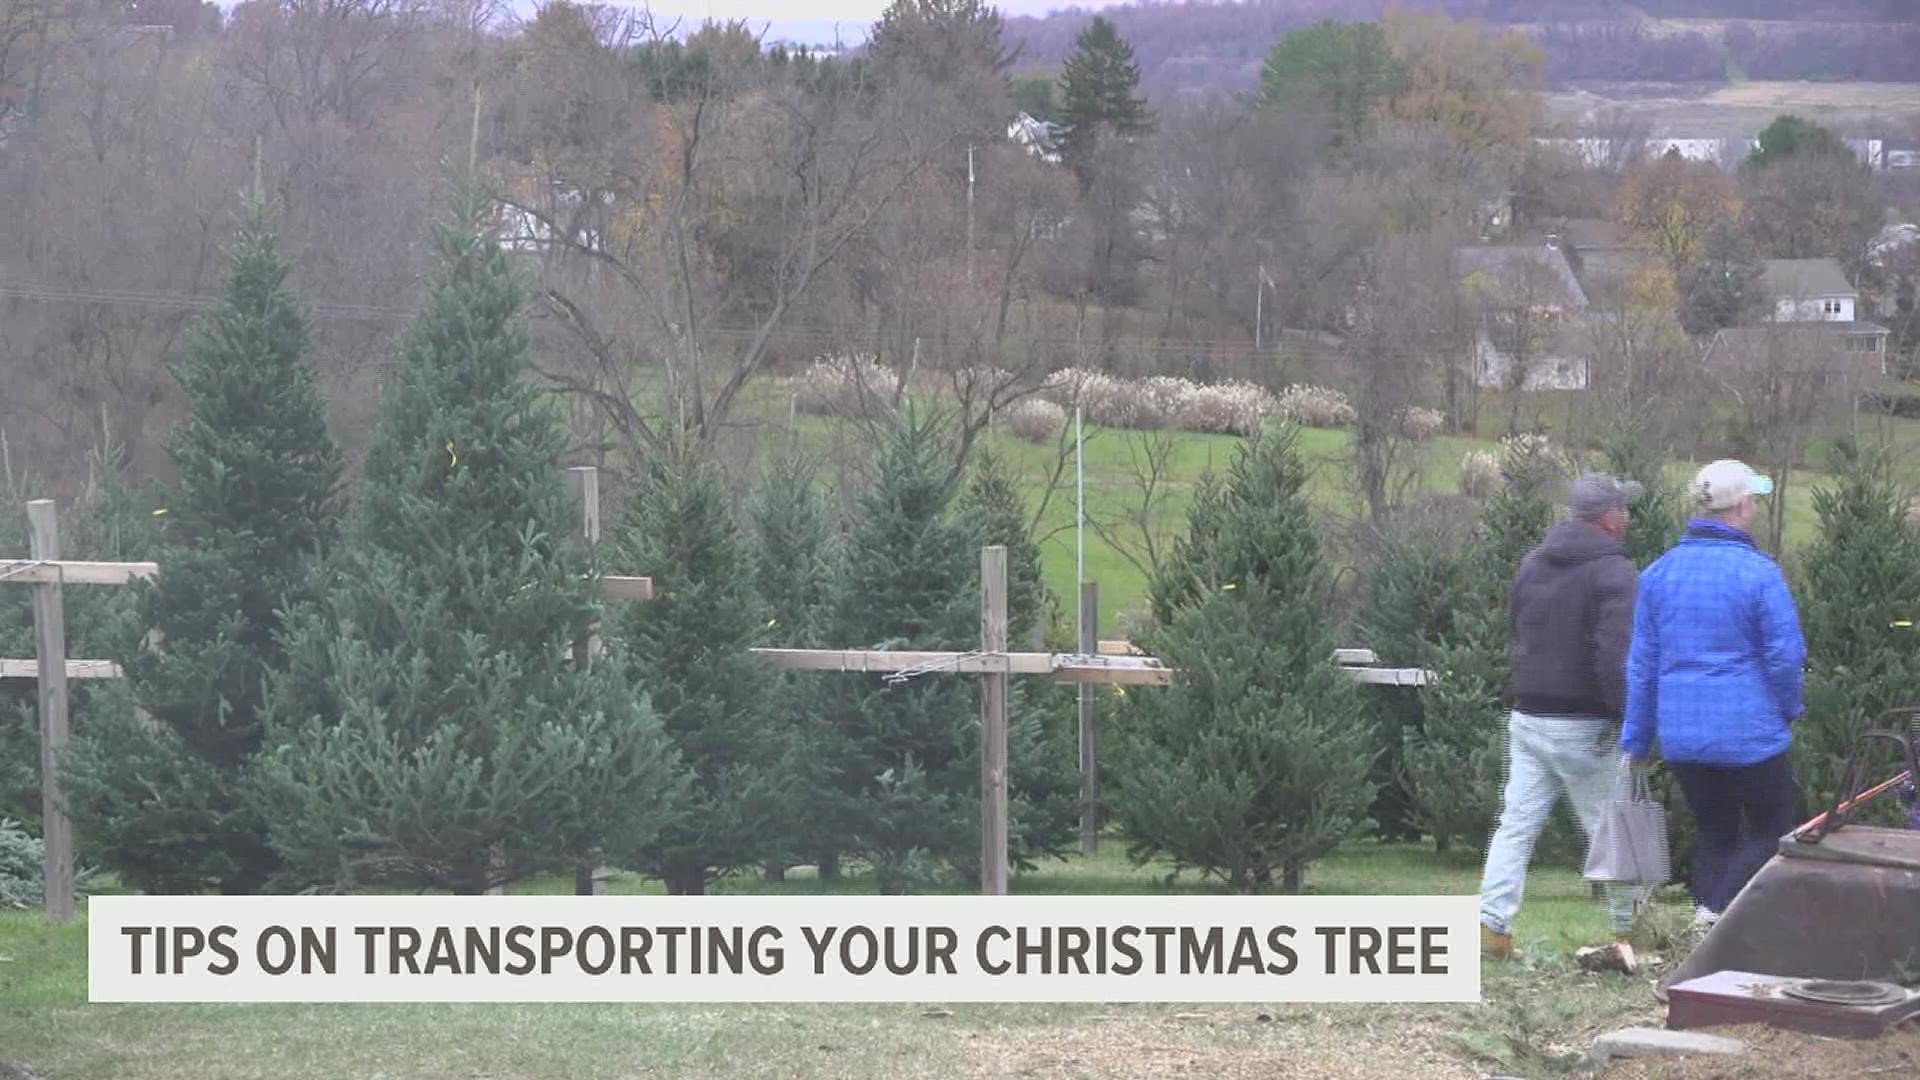 AAA recommends covering the roof with an old blanket and wrapping the tree in netting.